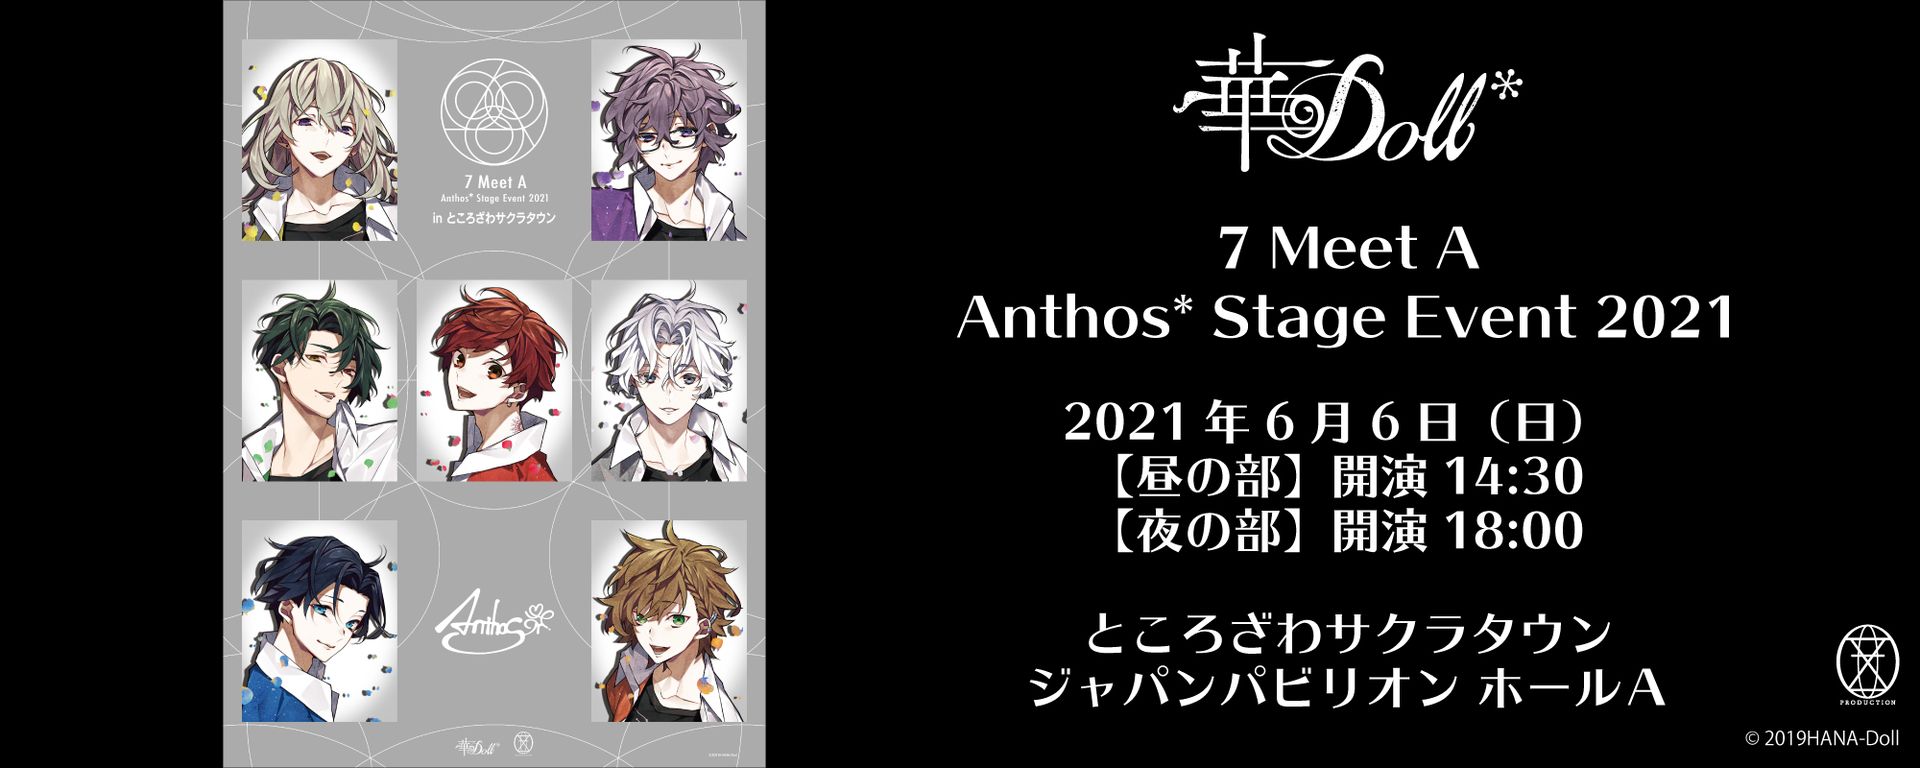 [Streaming+] HANA‐Doll＊　7 Meet A　Anthos* Stage Event 2021